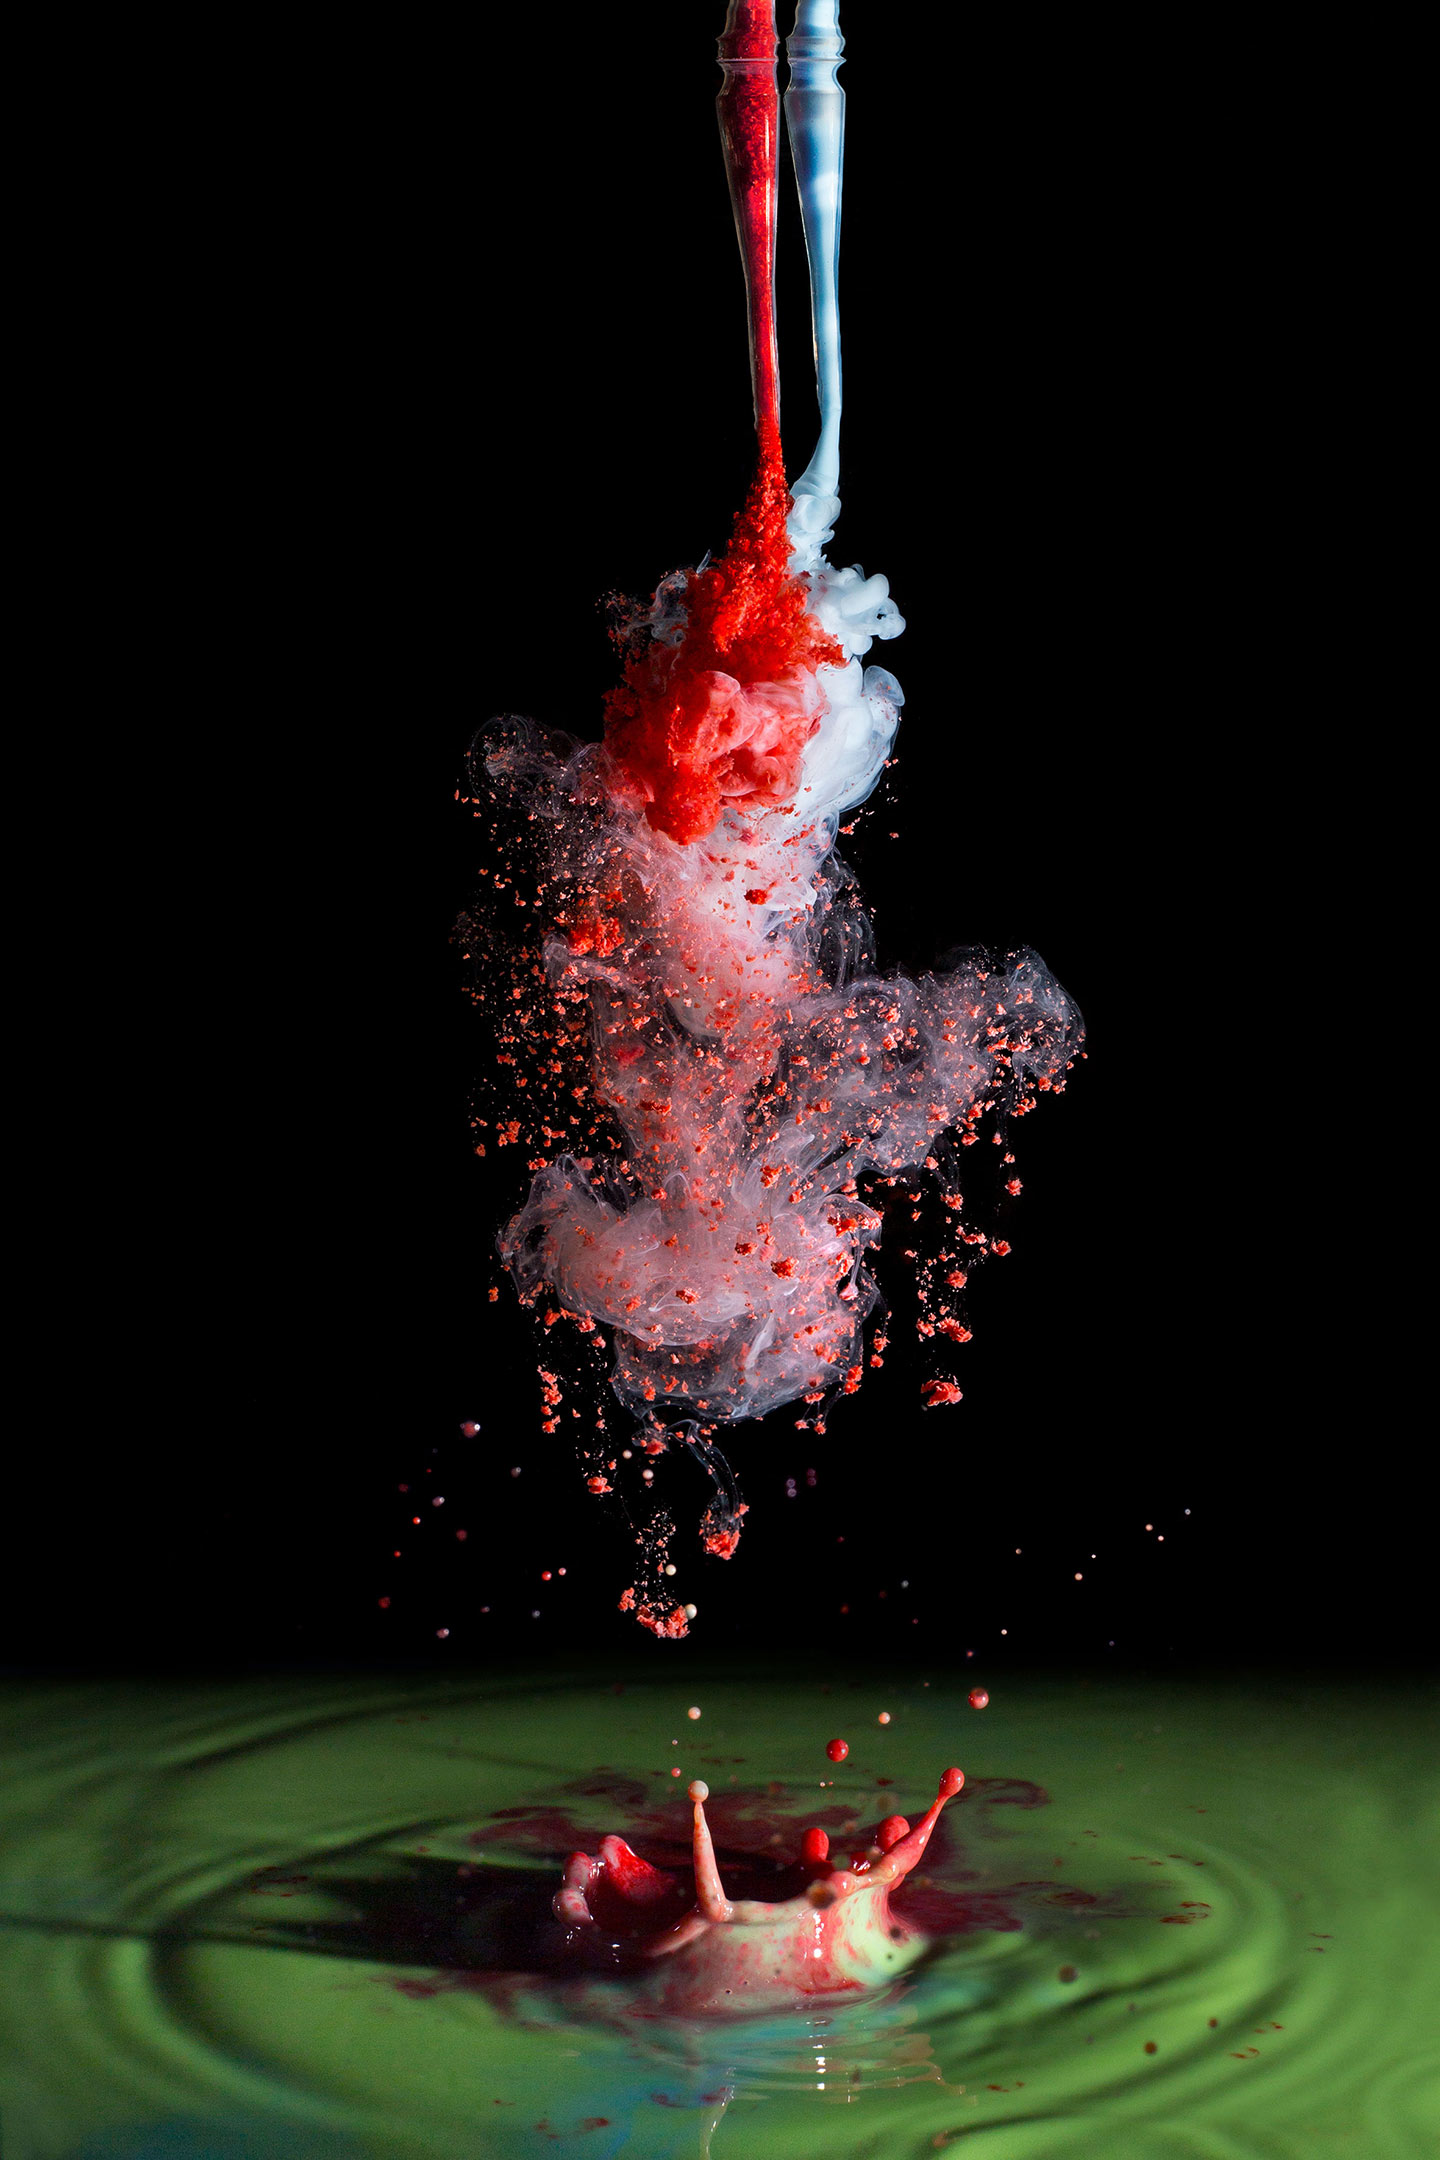 Photographer Creates Mesmerizing 'Liquid Ink Art' Out of Household Items1440 x 2160